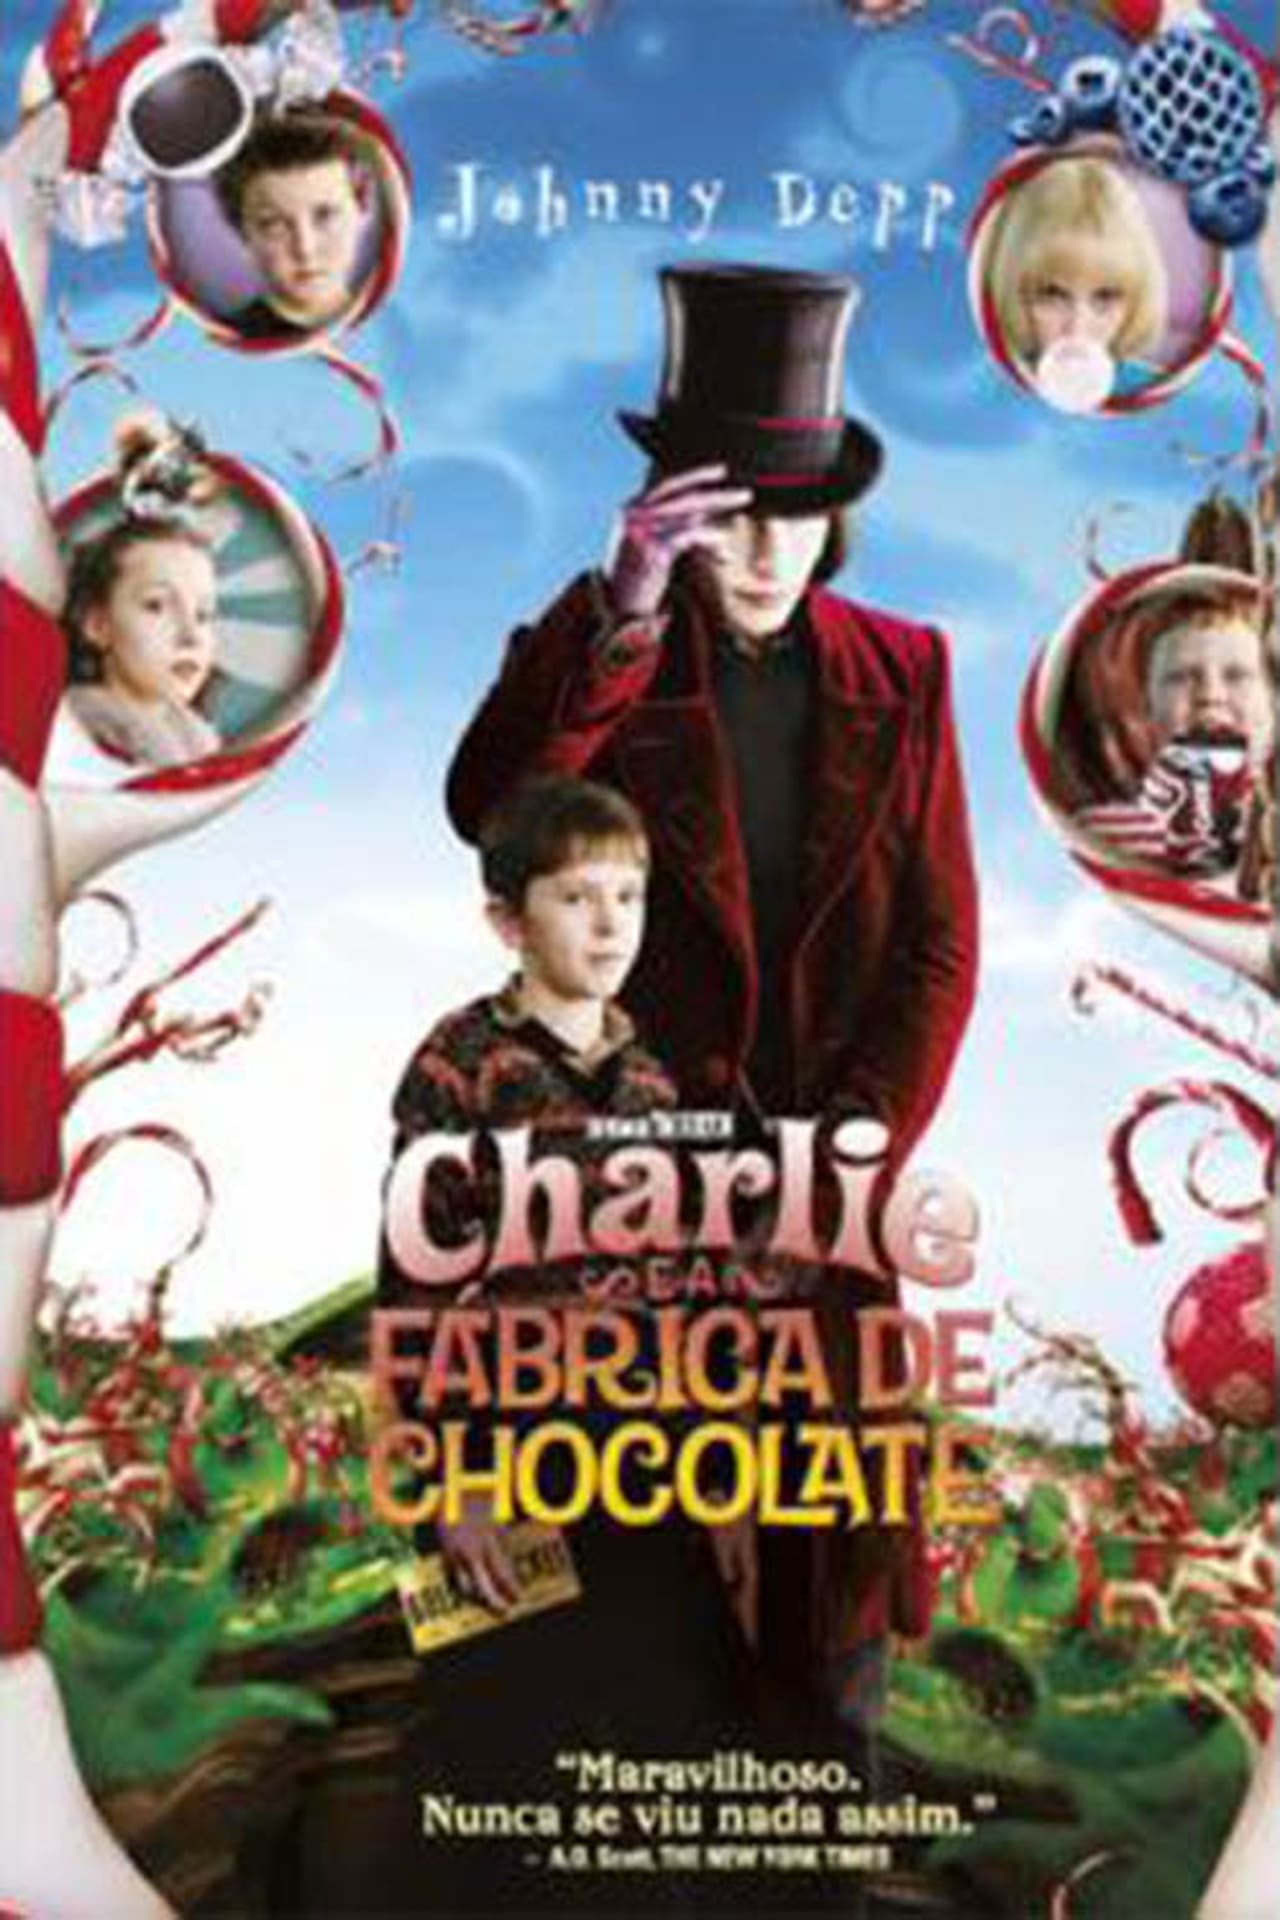 Full Free Watch Charlie and the Chocolate Factory (2005) Online Full - Where Can I Watch Charlie And The Chocolate Factory